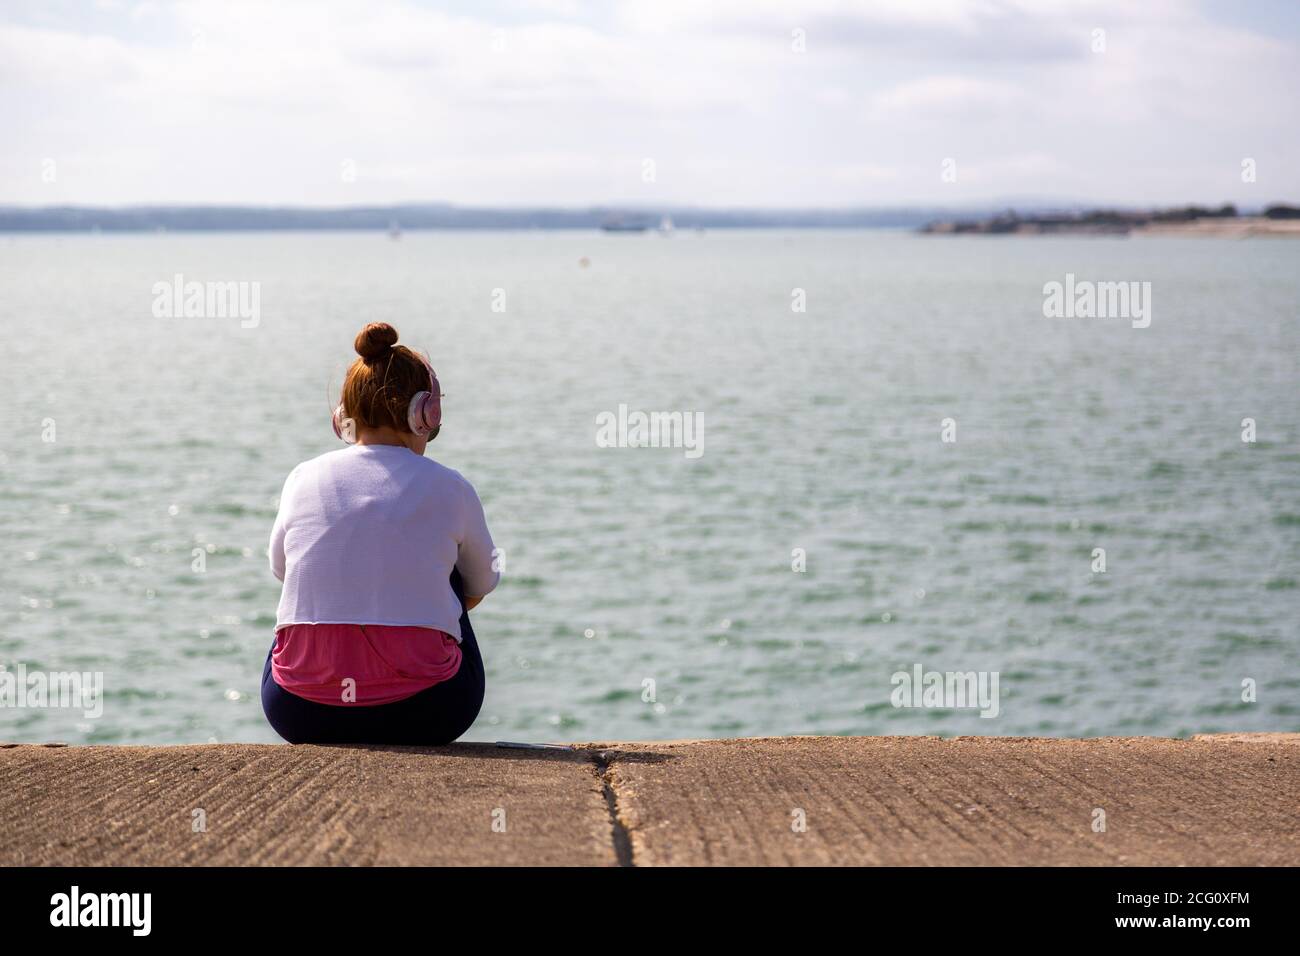 A teenager sitting alone on a wall listening to music on headphones looking at a view of the sea Stock Photo